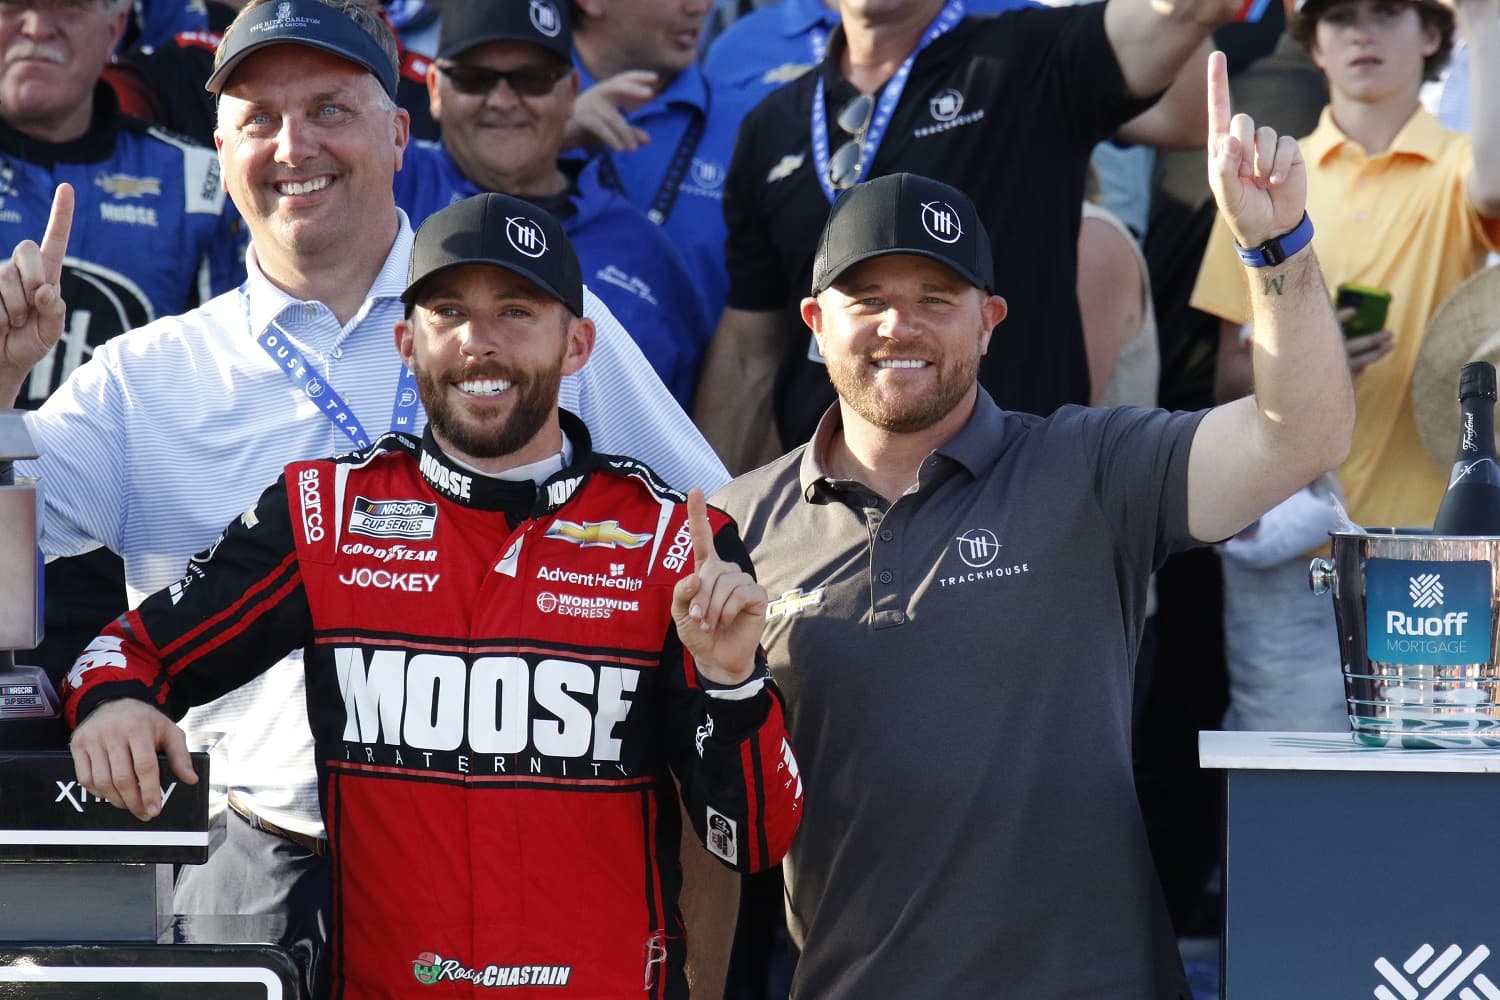 Ross Chastain poses in Victory Lane with team co-owner Justin Marks after winning the NASCAR Cup Series Geico 500 on April 24, 2022, at Talladega SuperSpeedway.